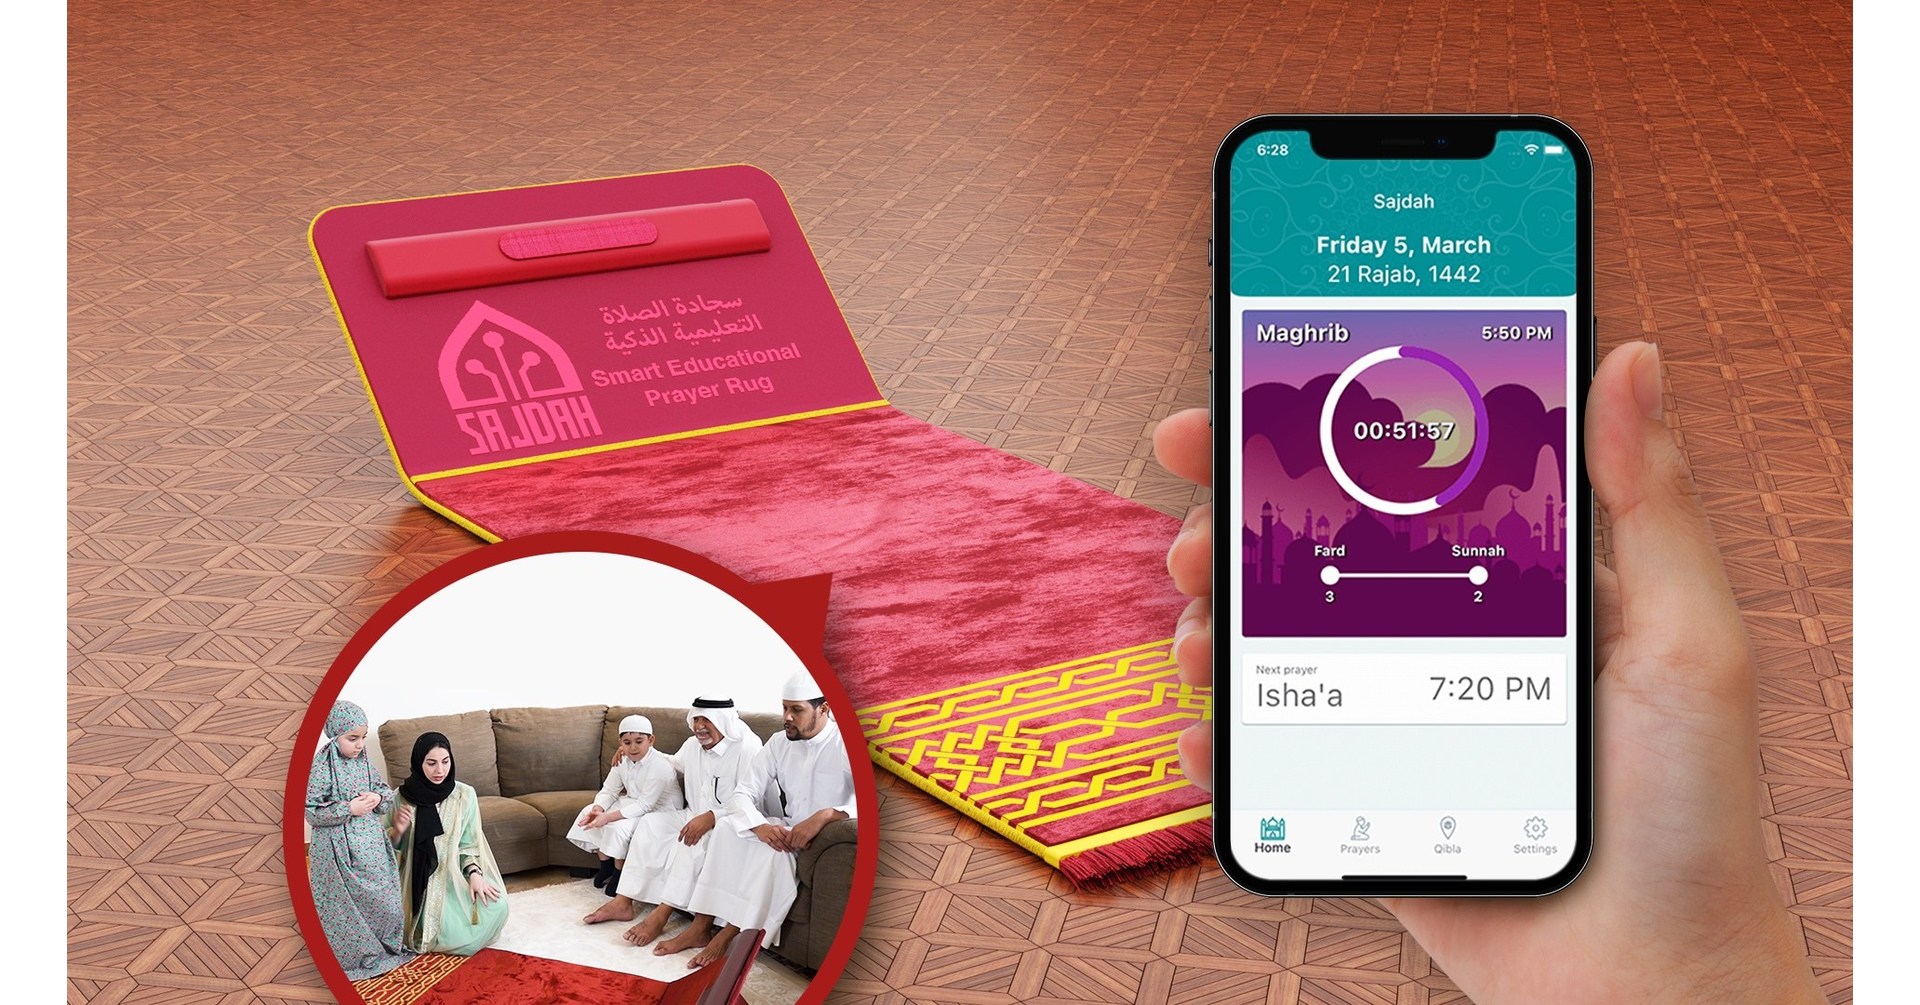 The First-Ever Smart Educational Petition Carpet for Muslims Exceeds Its